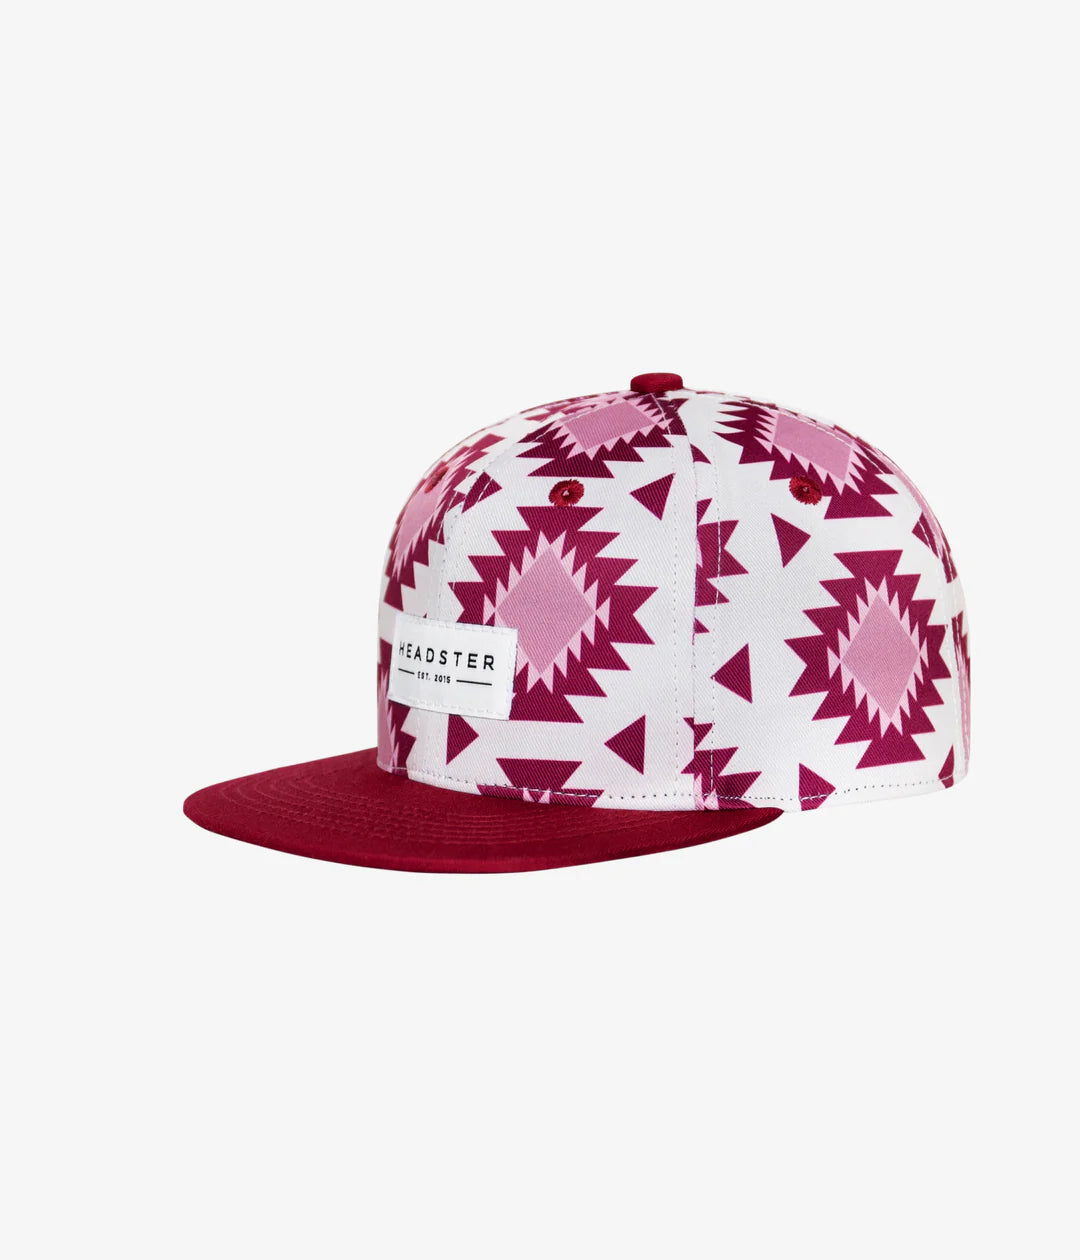 HDR Headster Vibe of Mine Raspberry Snap Back